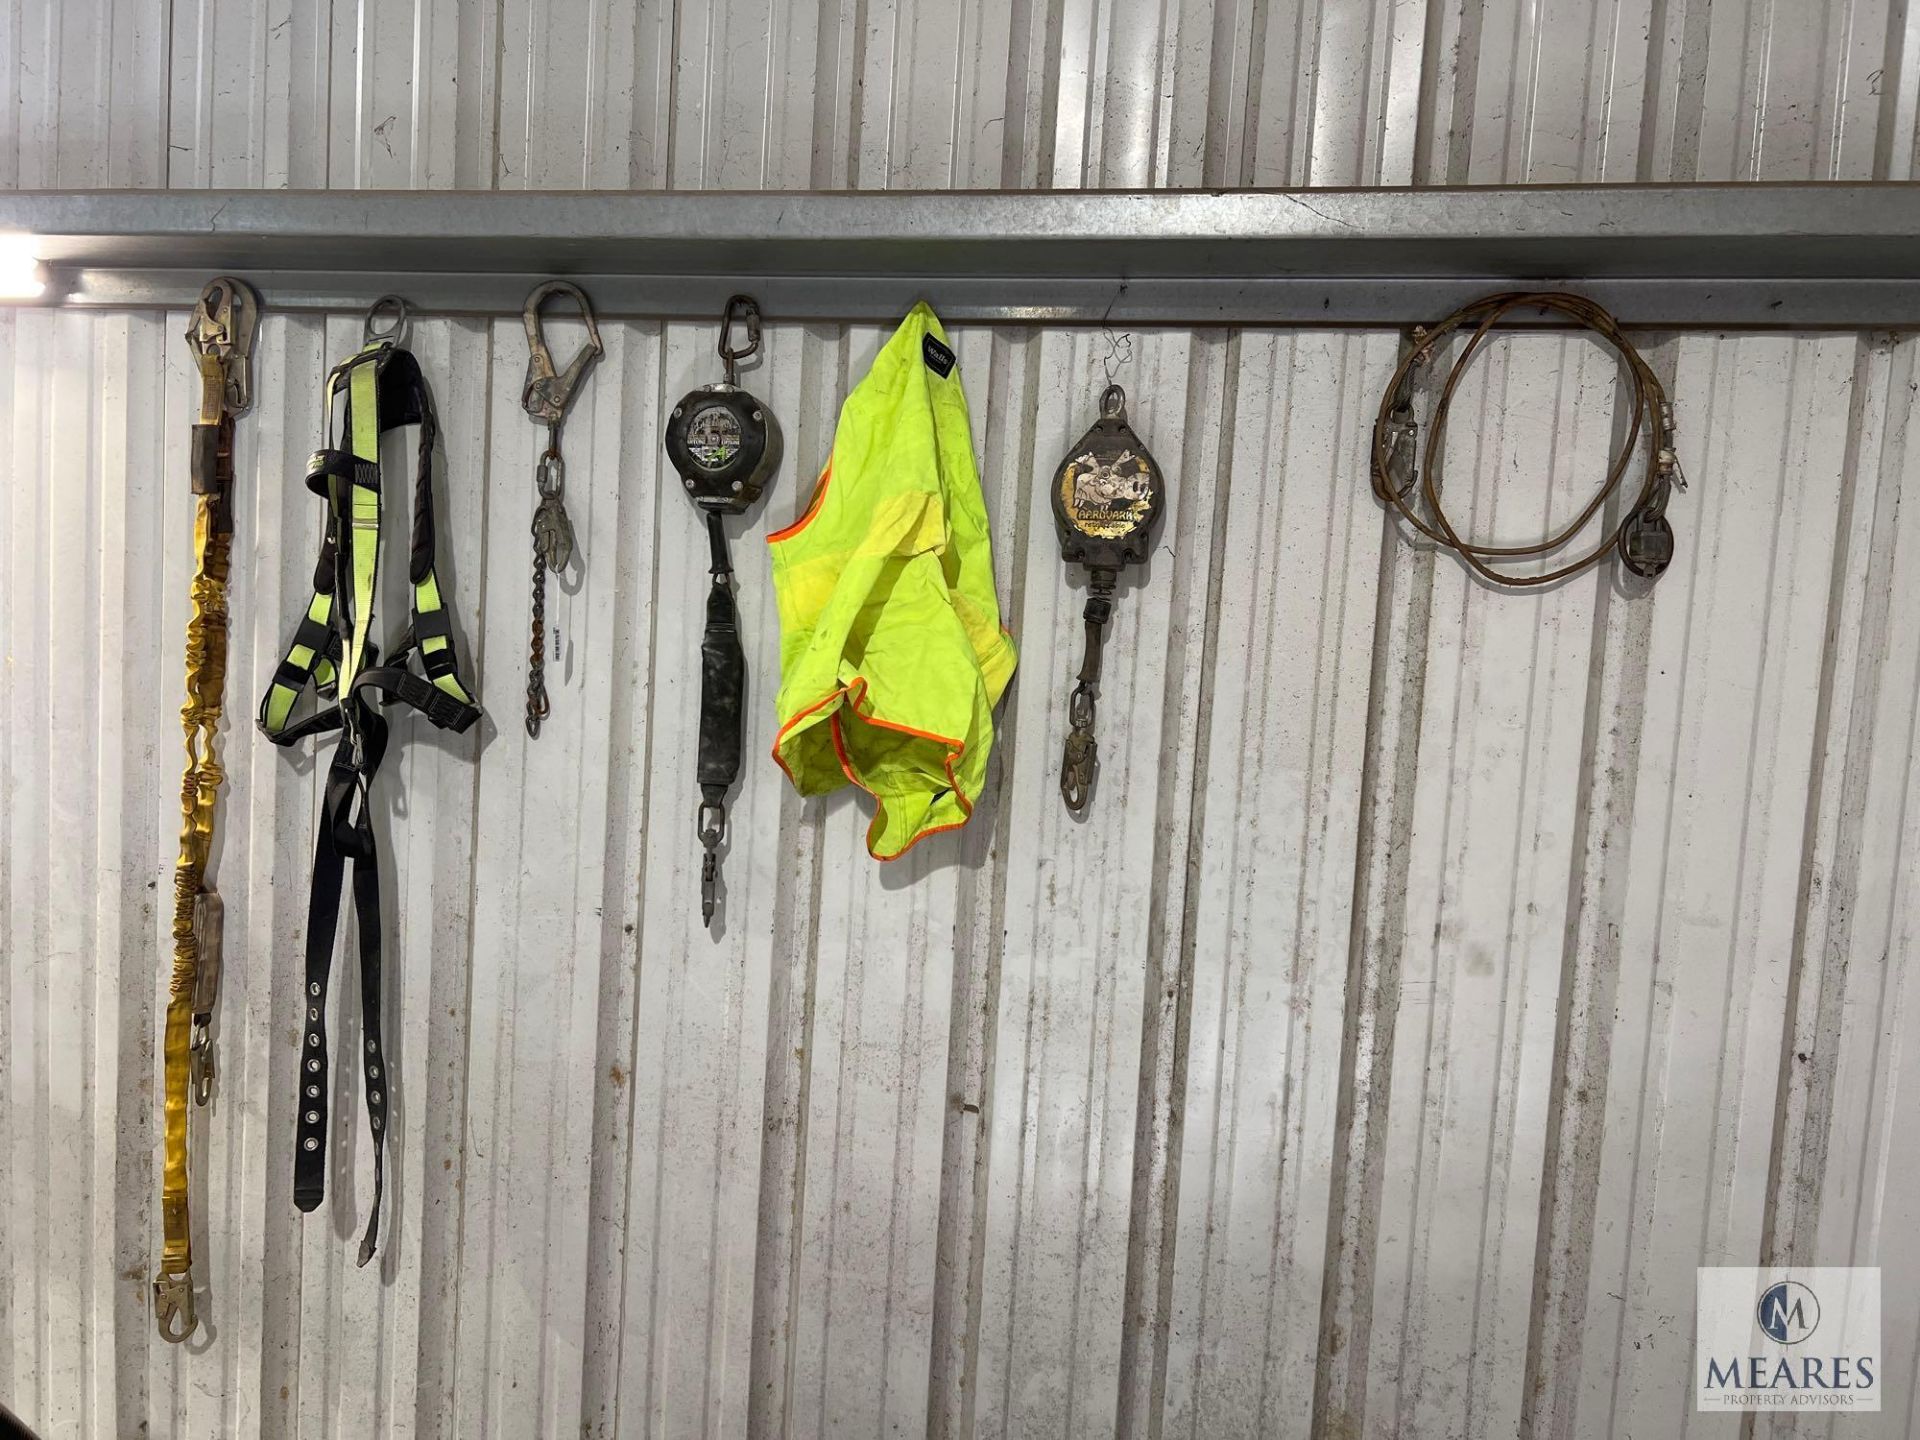 Mixed Lot of Safety Items - Harnesses, Fall Protection